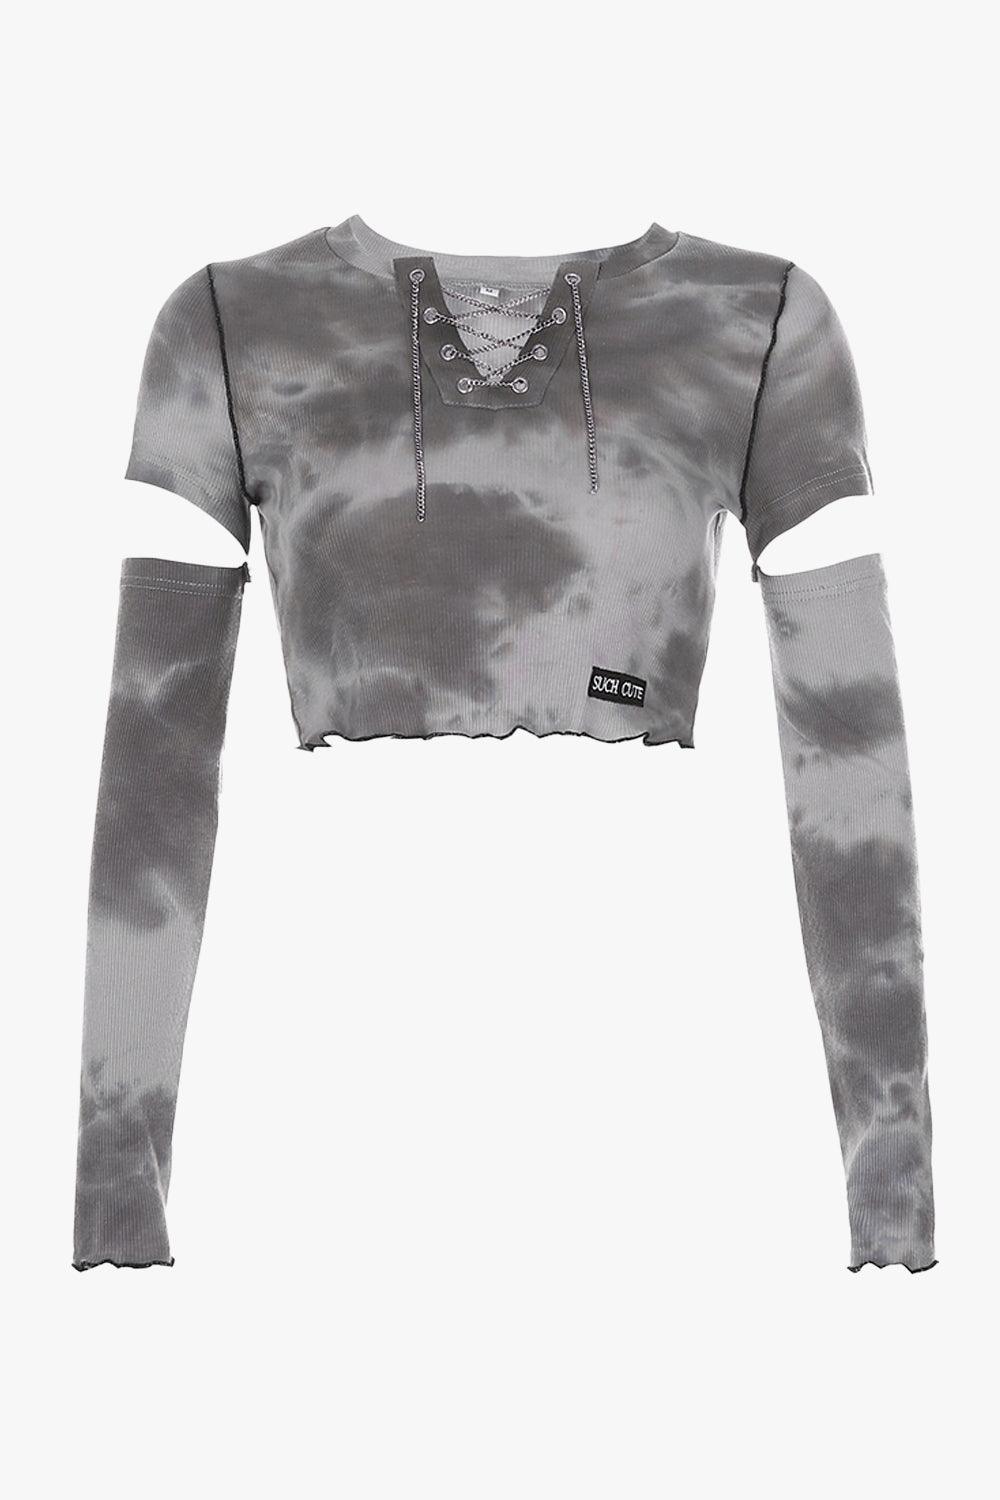 Gray Clouds Tie Dye Long Sleeve Crop Top - Aesthetic Clothes Shop